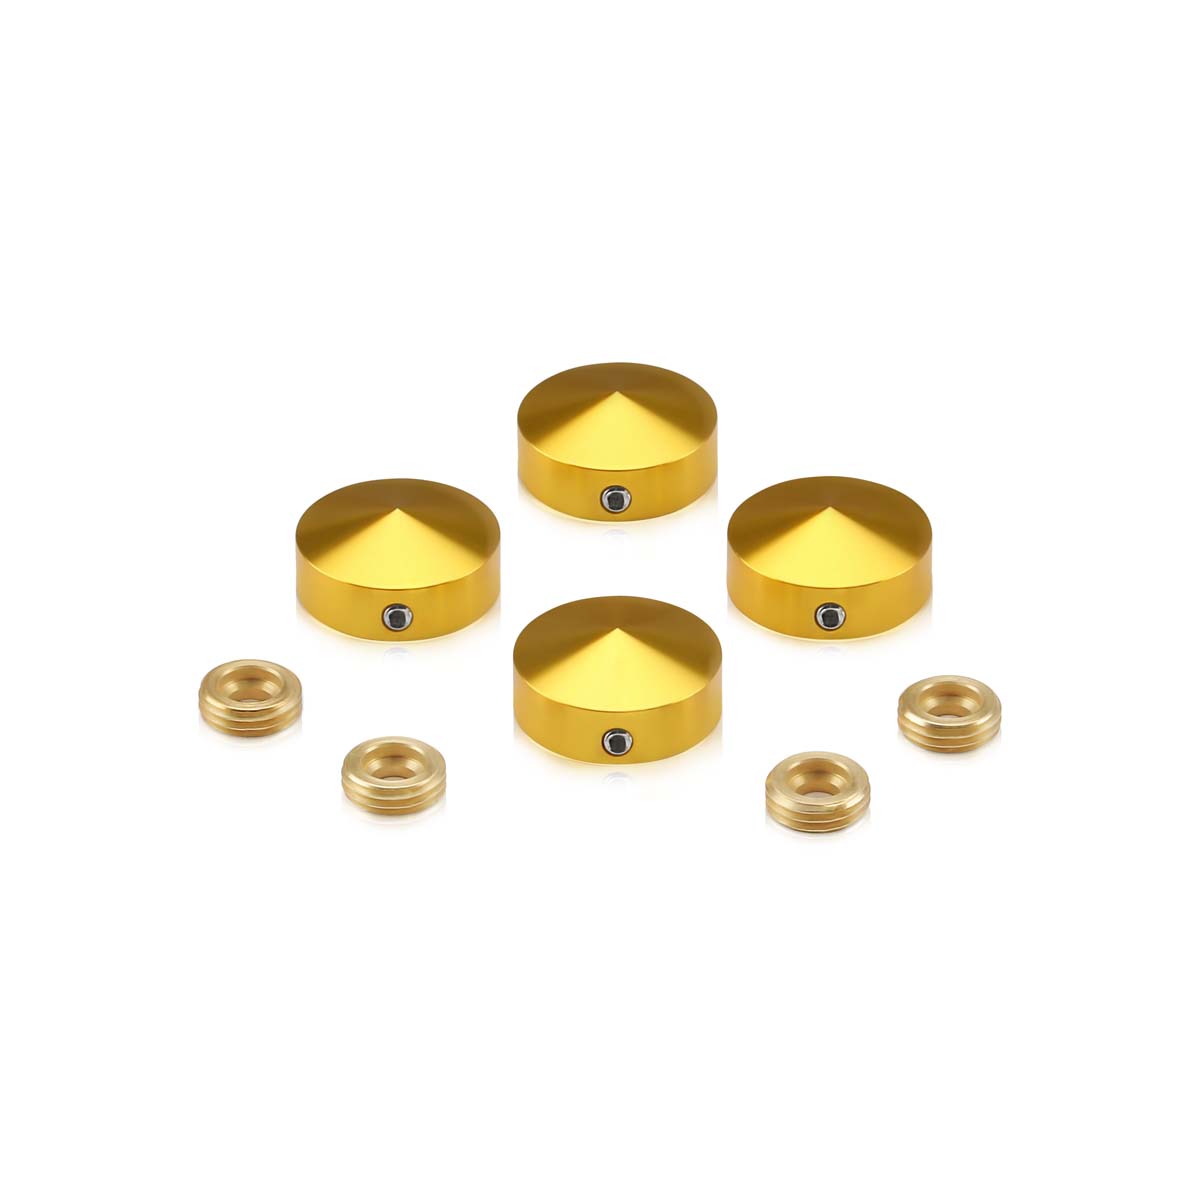 Set of 4 Conical Locking Screw Cover, Diameter: 13/16'' (3/4''), Aluminum Gold Anodized Finish (Indoor or Outdoor Use)